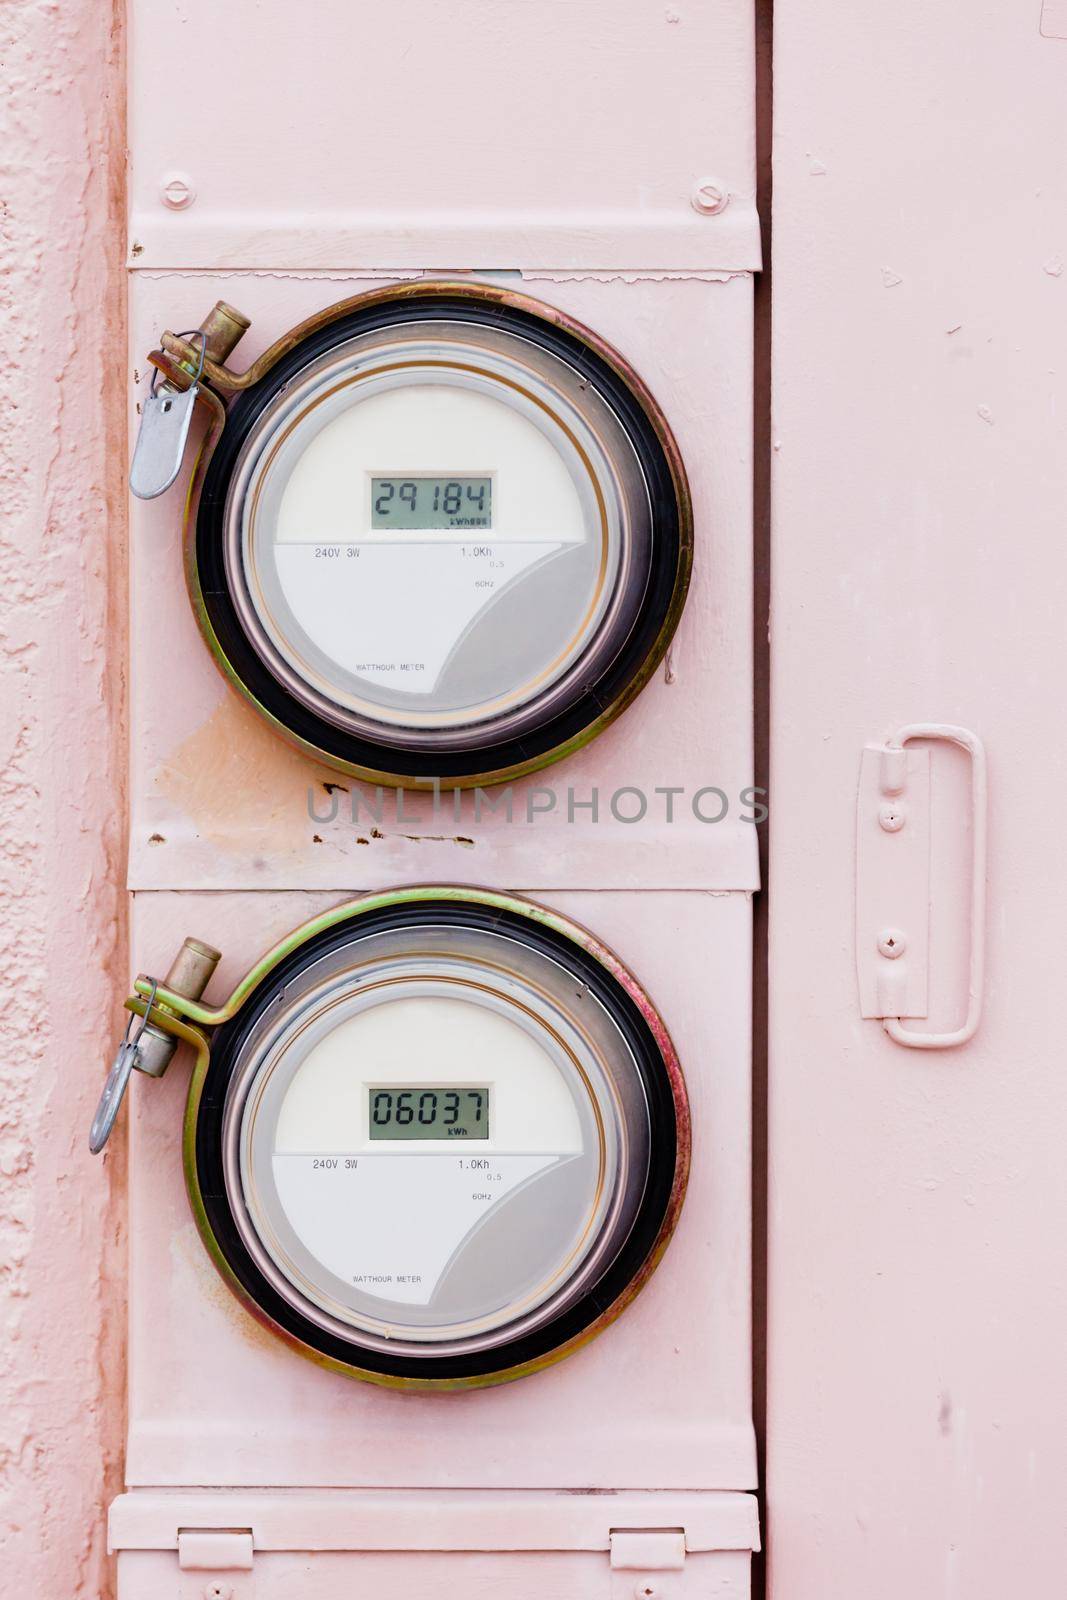 Modern smart grid residential digital power supply watthour meters on grungy pink exterior wall